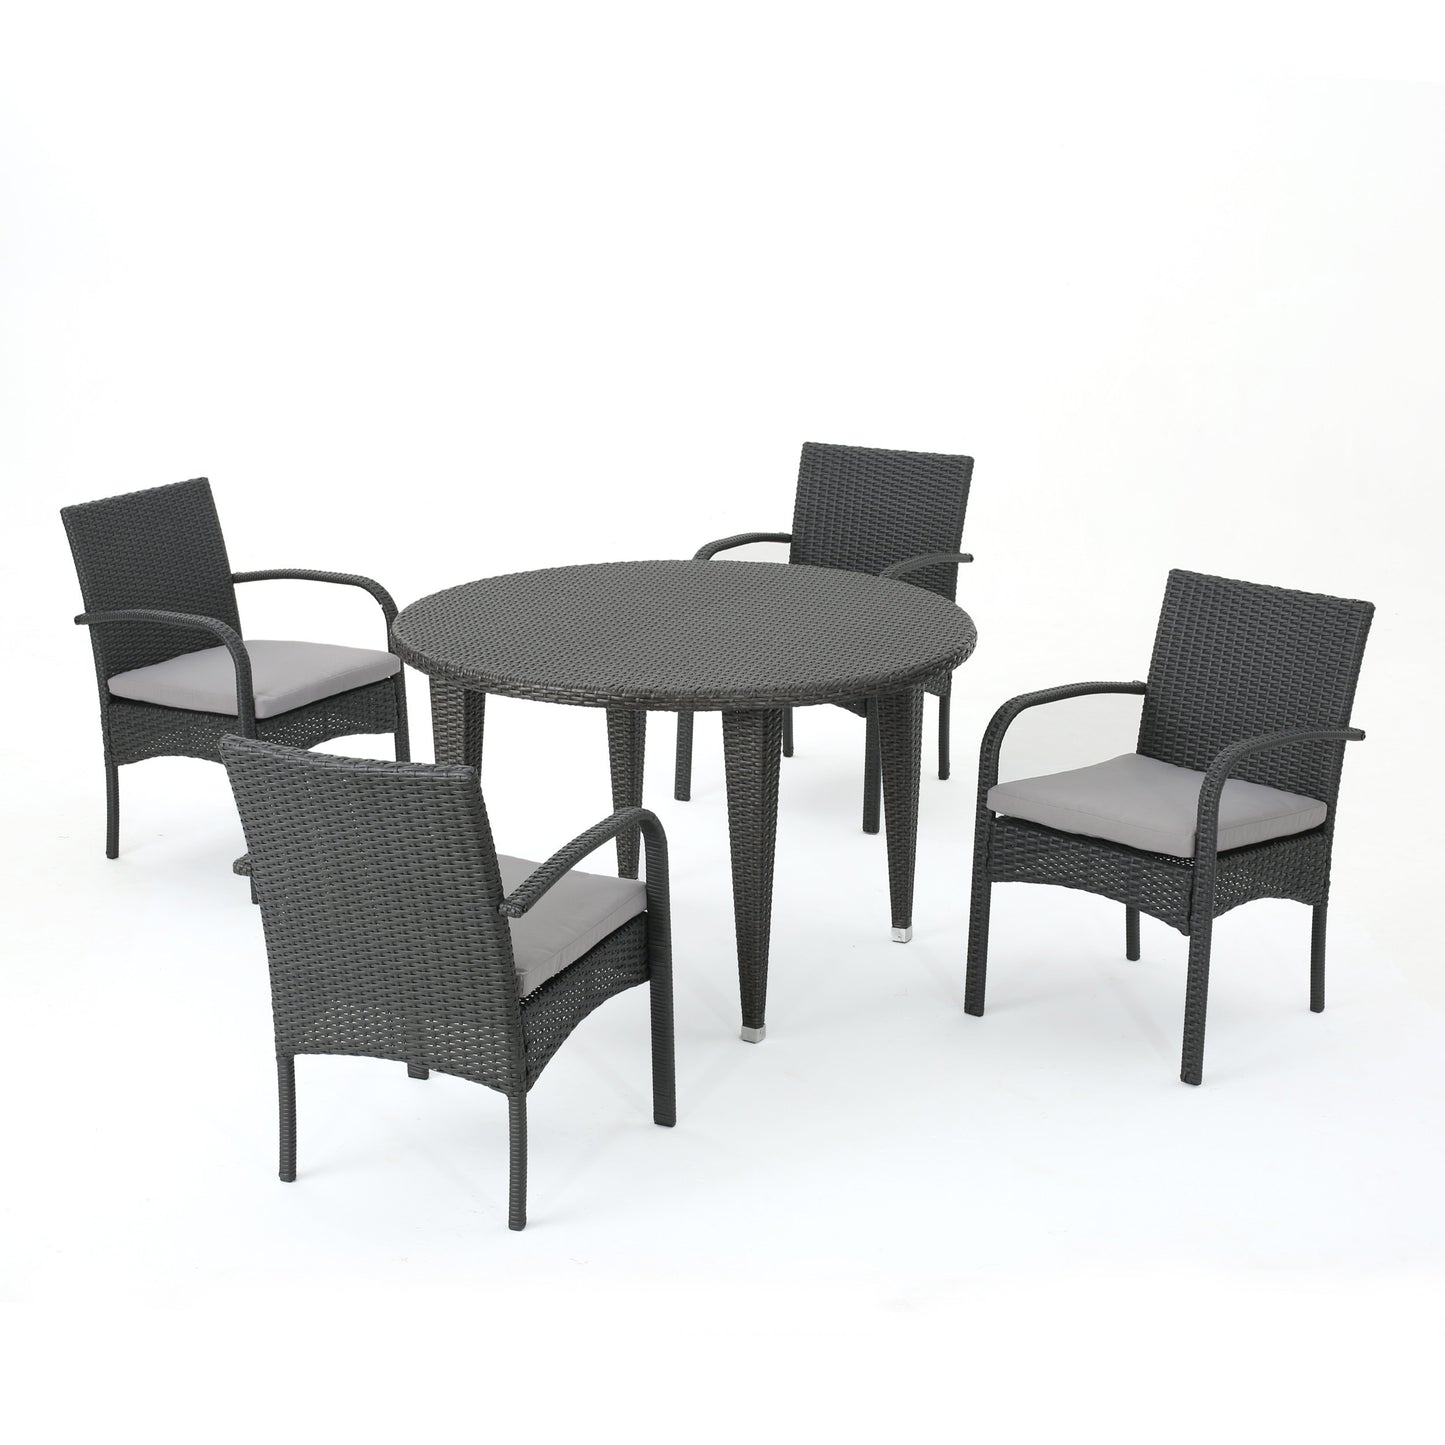 Maloa Outdoor 5 Piece Wicker Circular Dining Set with Water Resistant Cushions